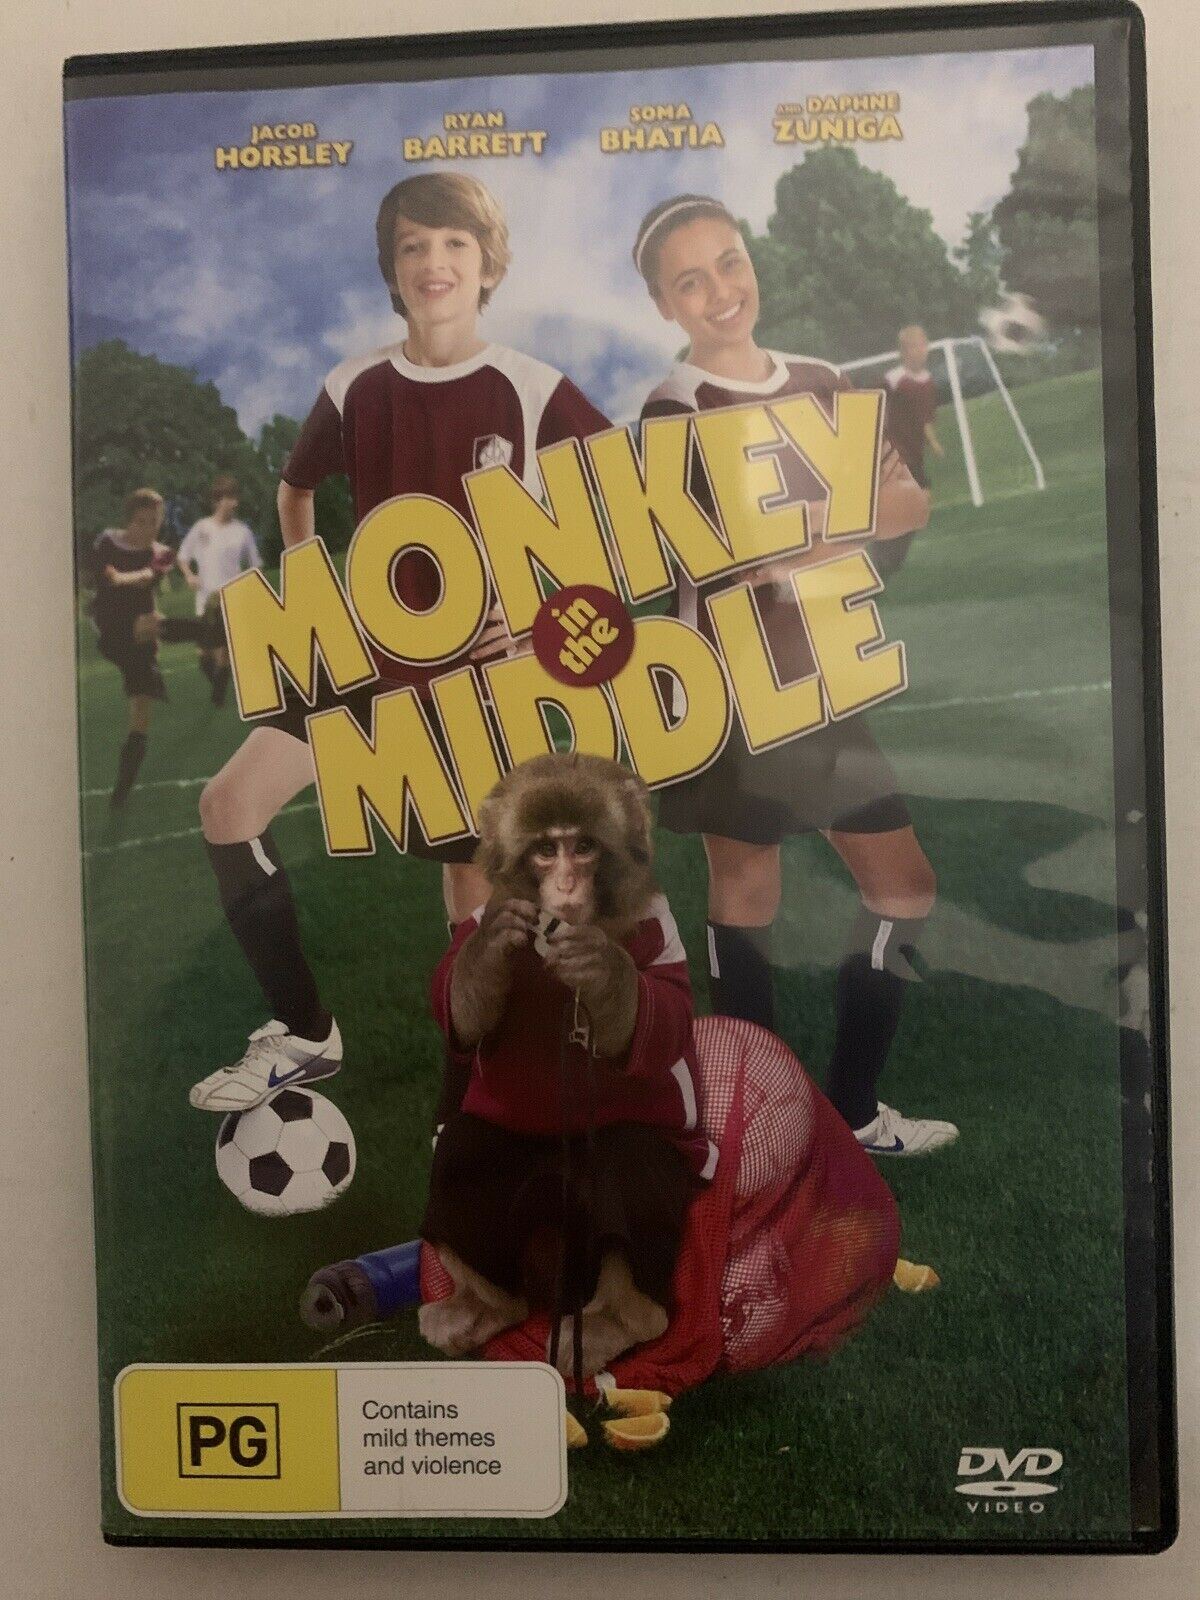 Monkey In The Middle (DVD, 2014) Jacob Horsley. Region 4